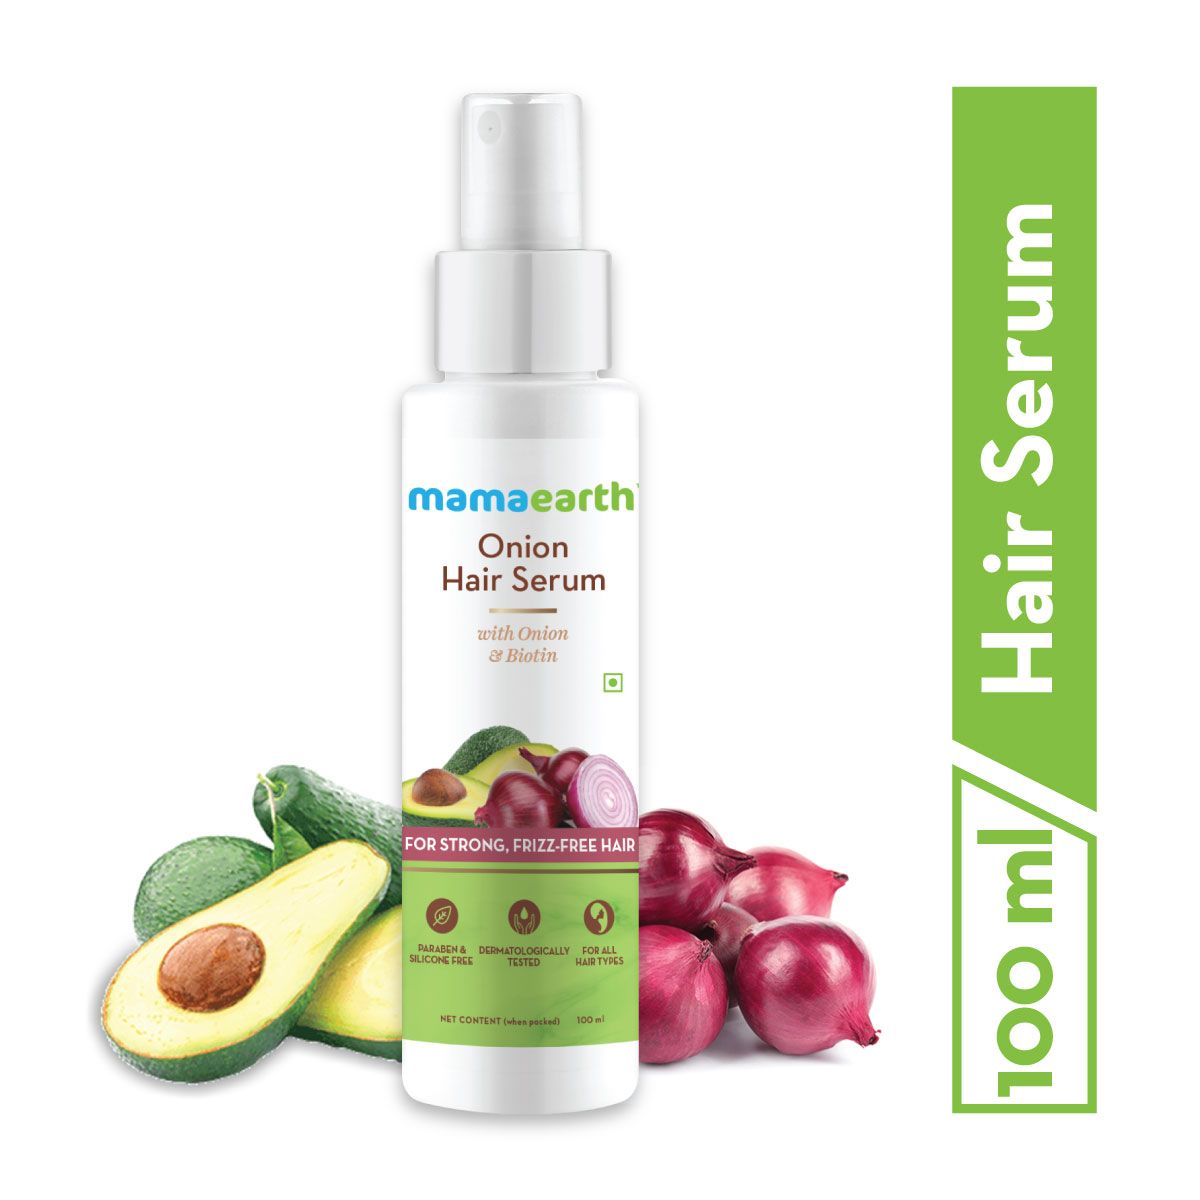 Mamaearth Onion Hair Serum Better Than Others Available In The Market